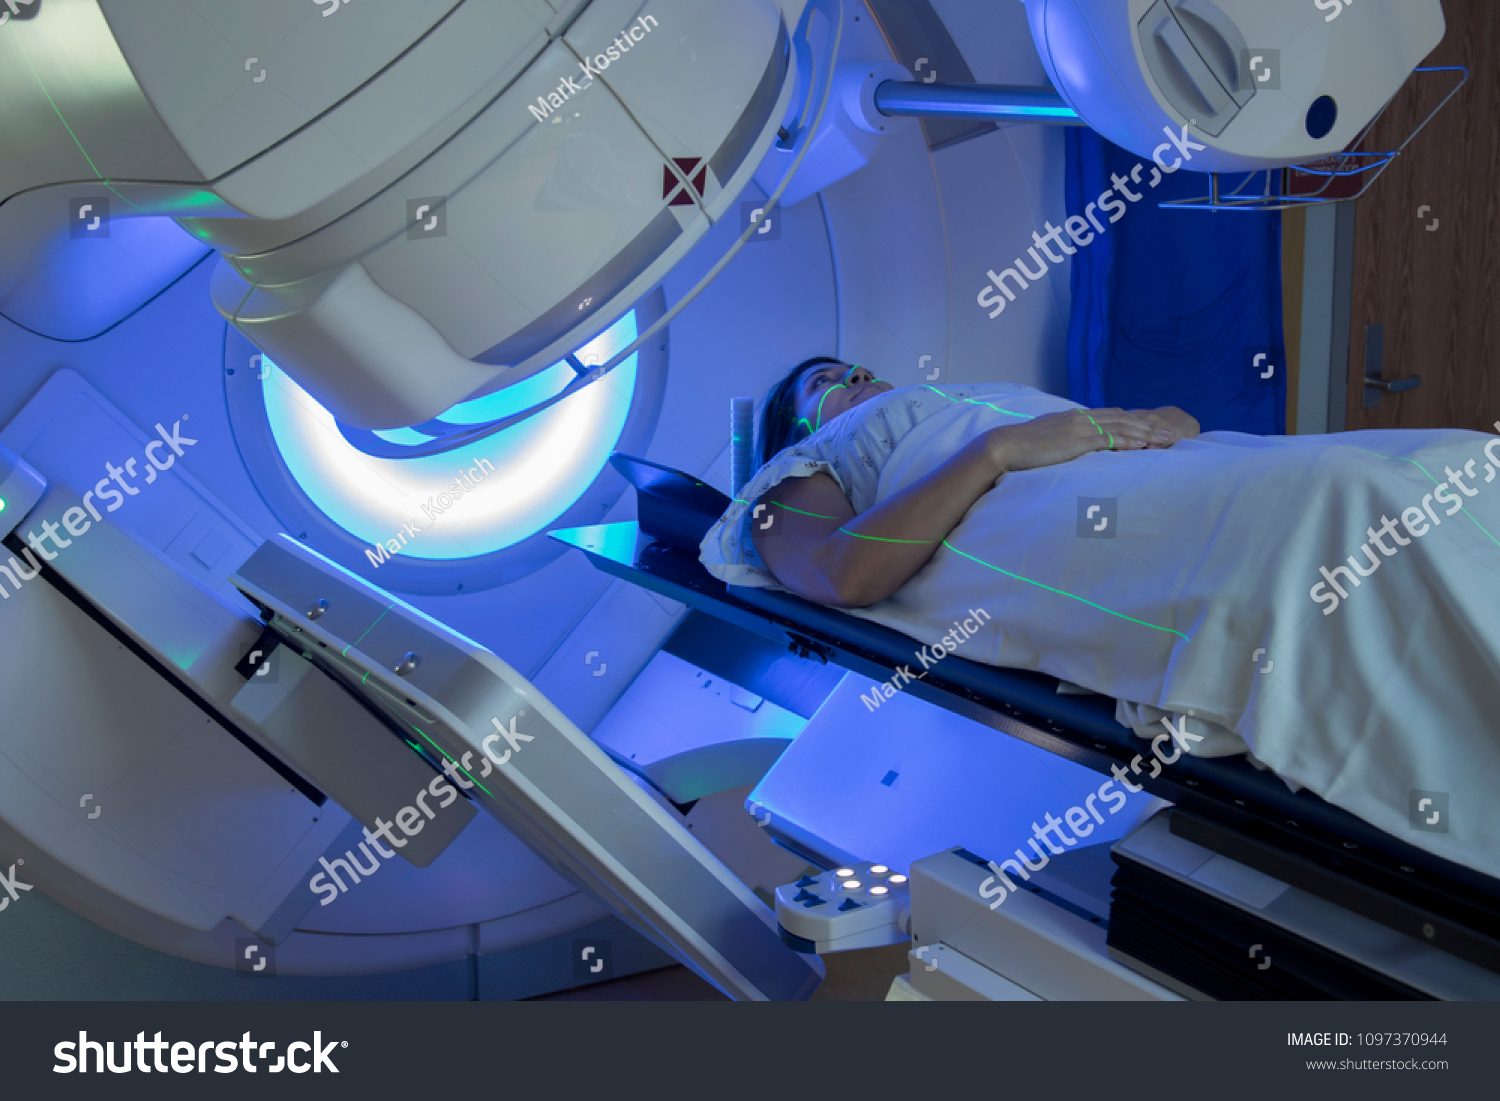 Woman Receiving Radiation Therapy Treatments for Breast Cancer #1097370944